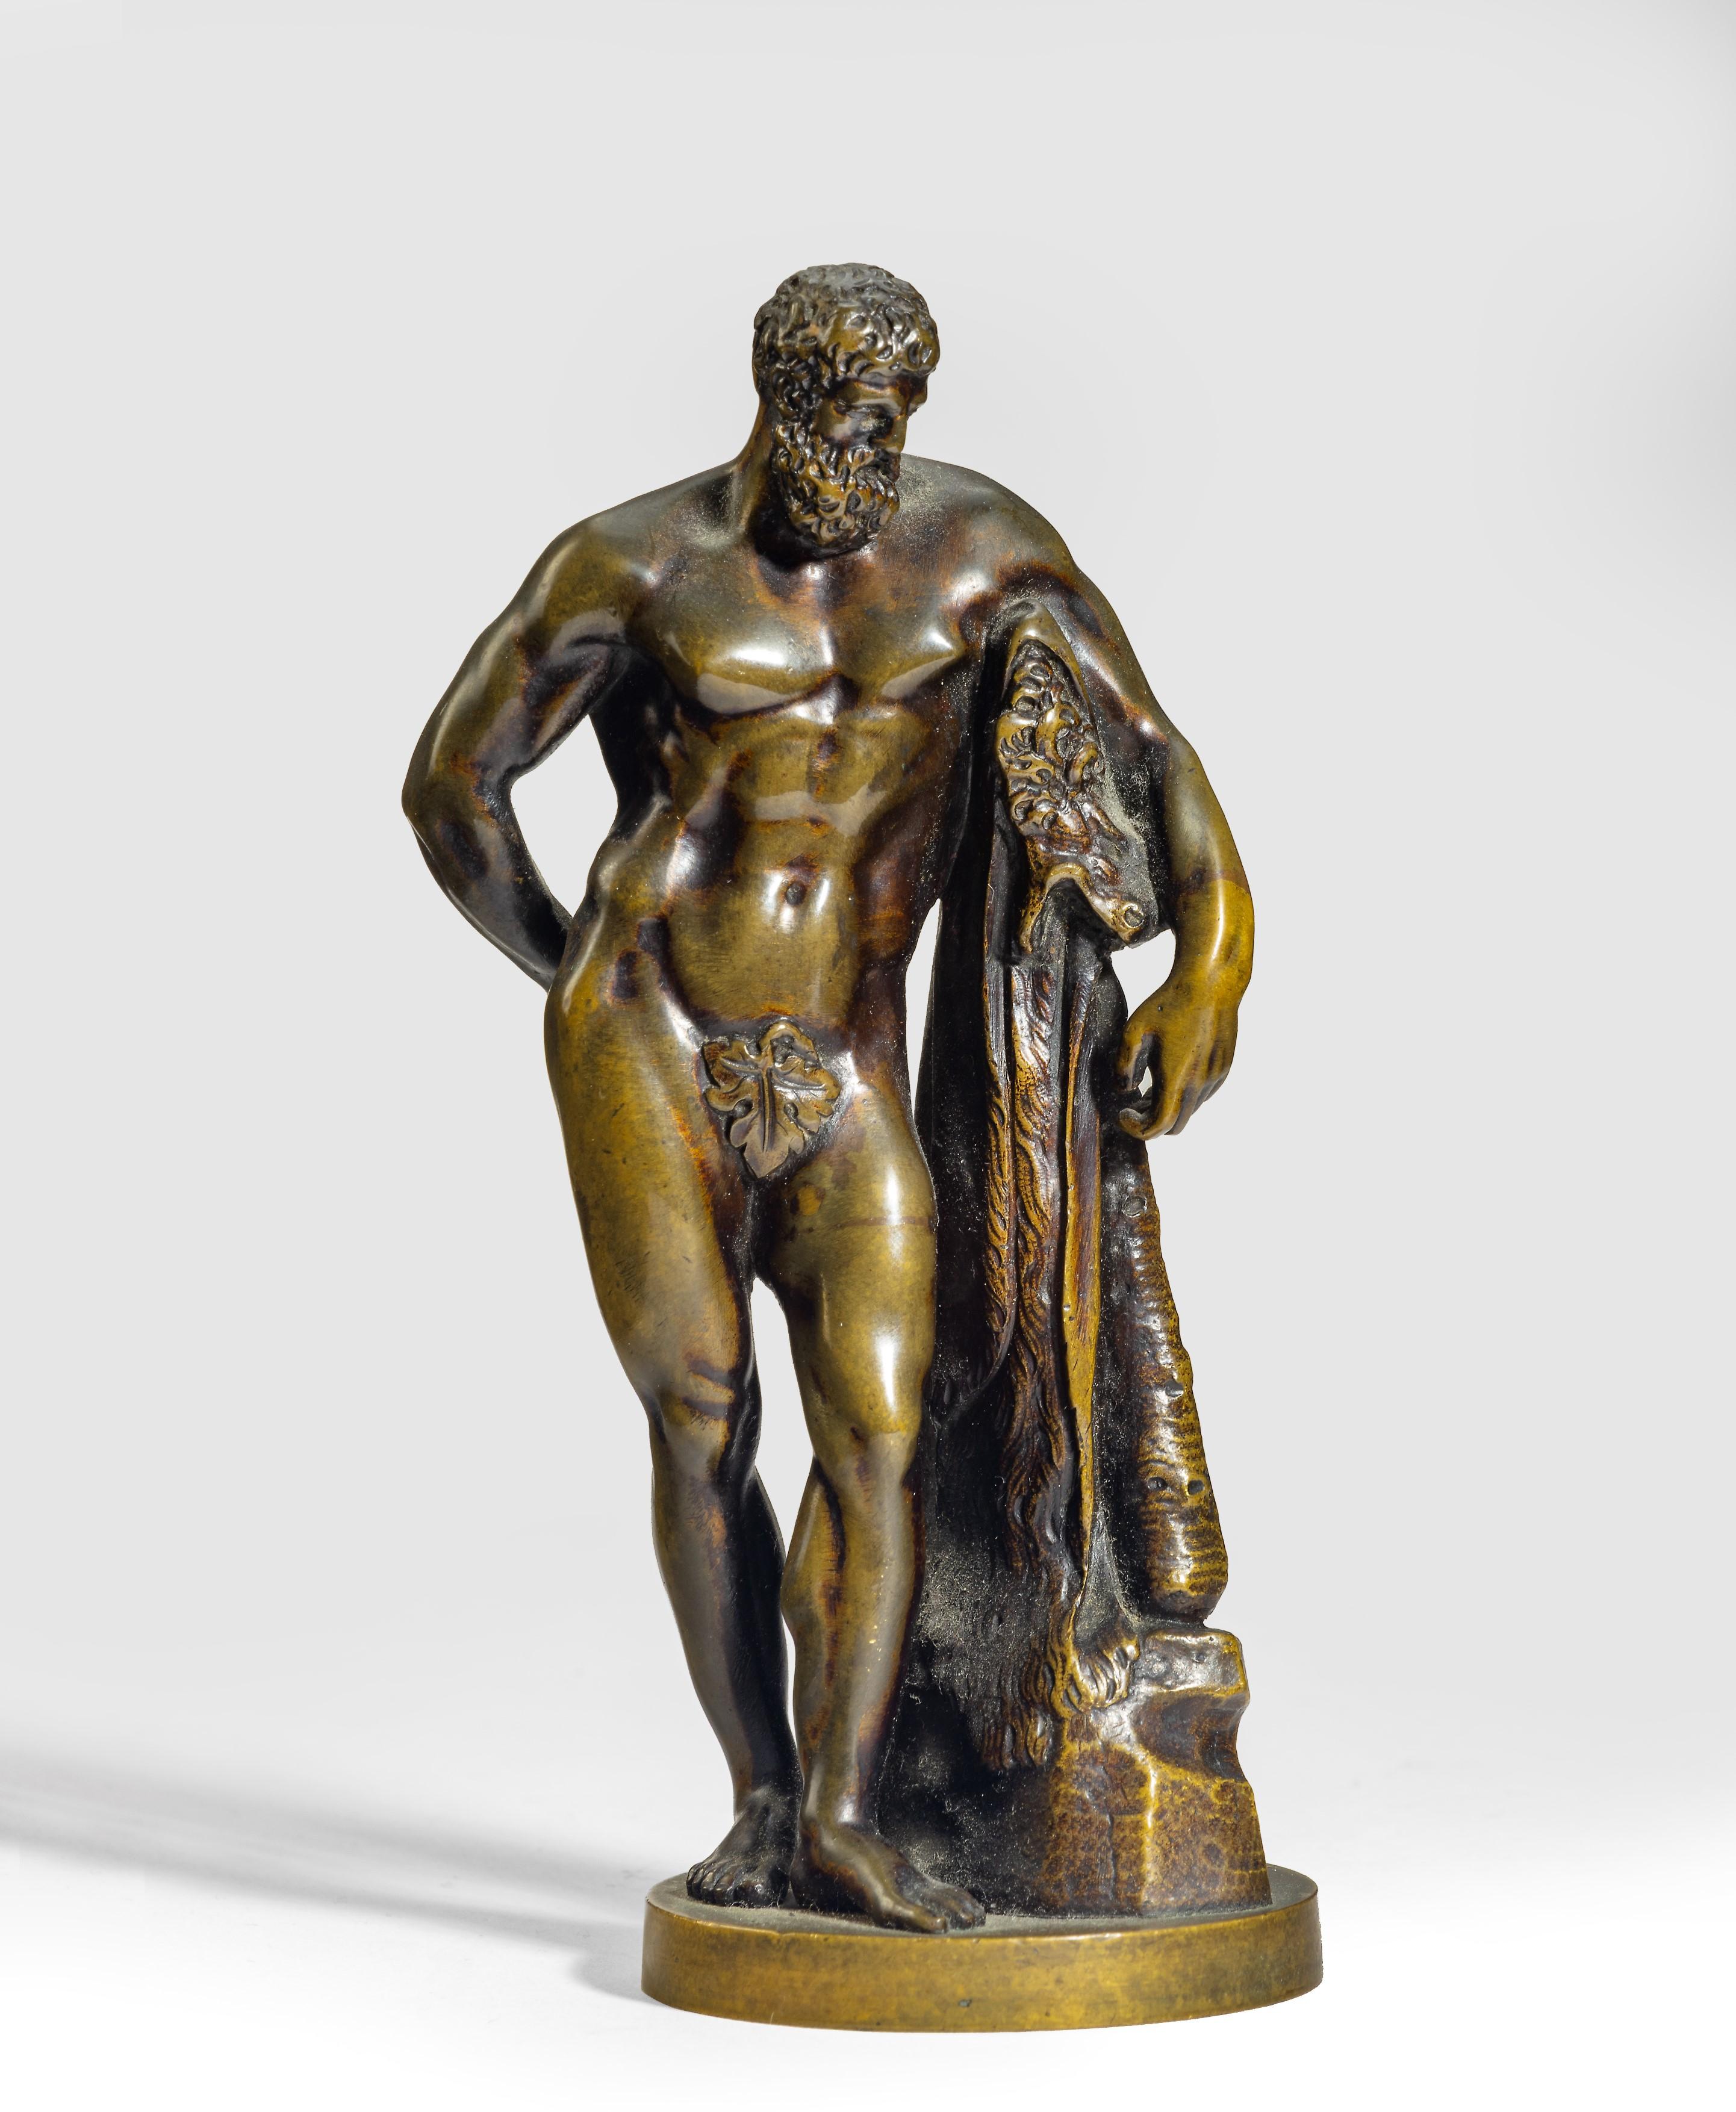 Unknown Figurative Sculpture - A Grand Tour bronze model of 'The Farnese Hercules', After the Antique